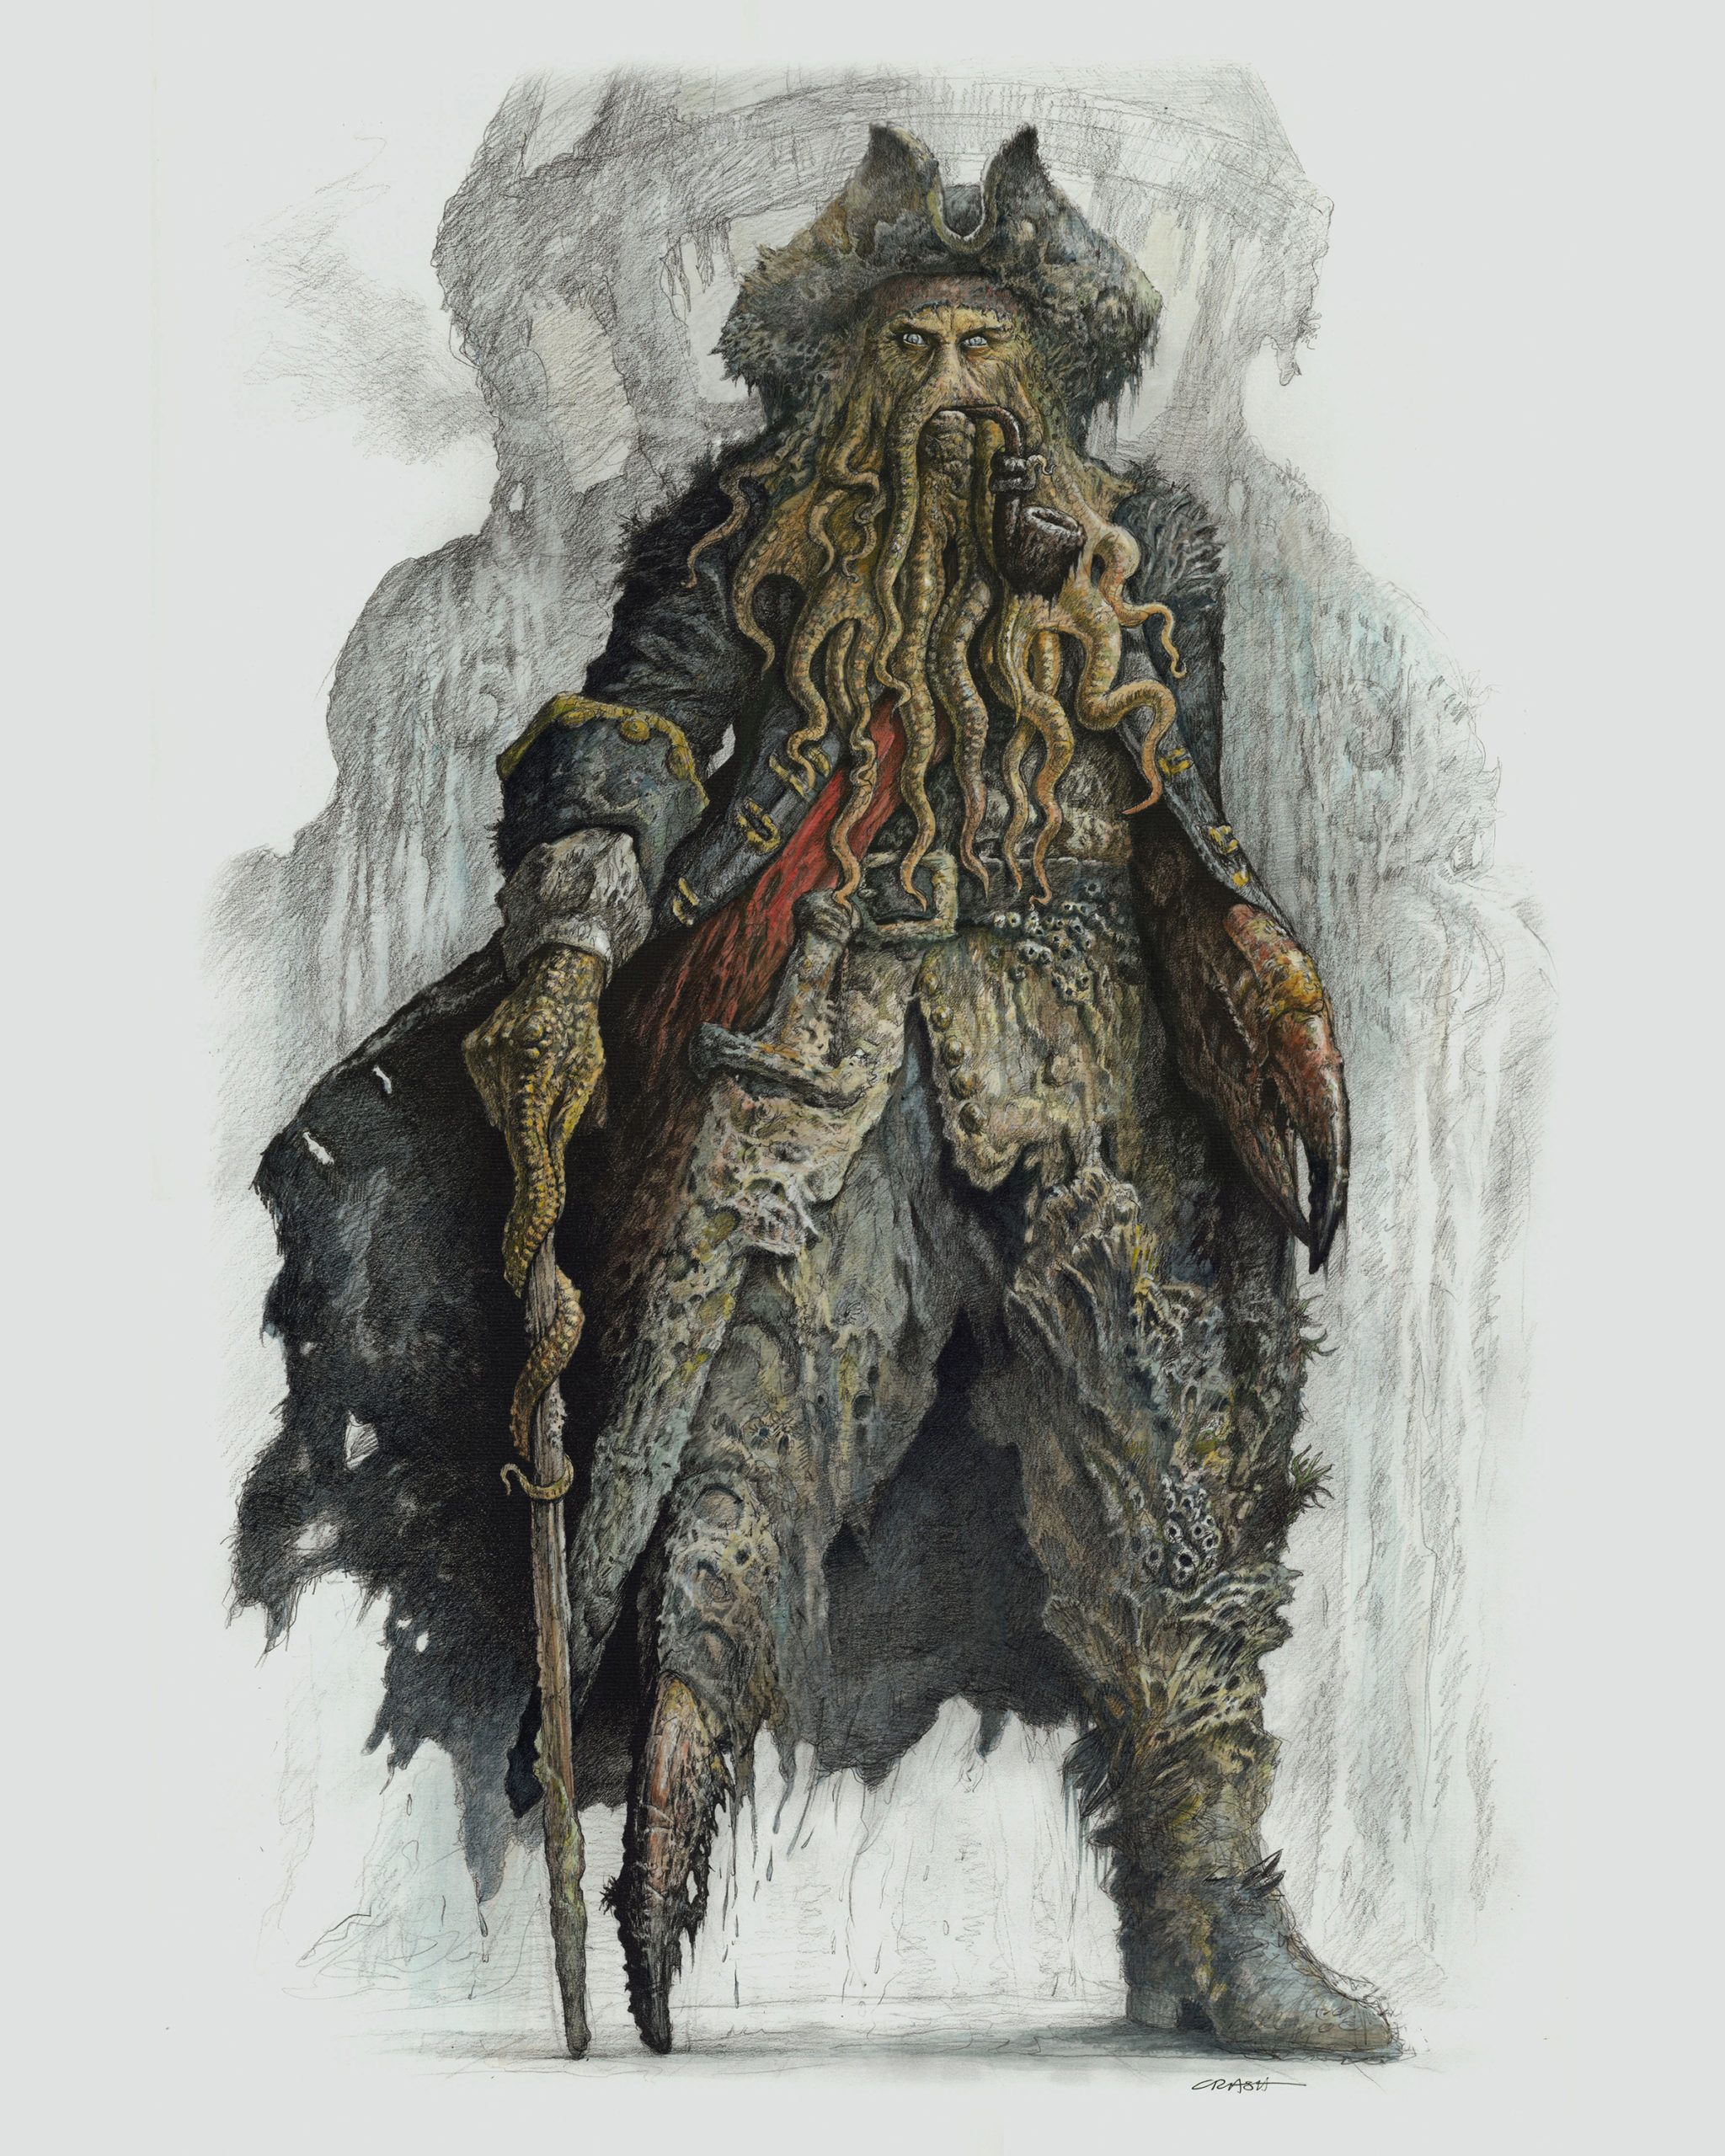 Davy Jones: The Legend, The Pirates, and The Flying Dutchman